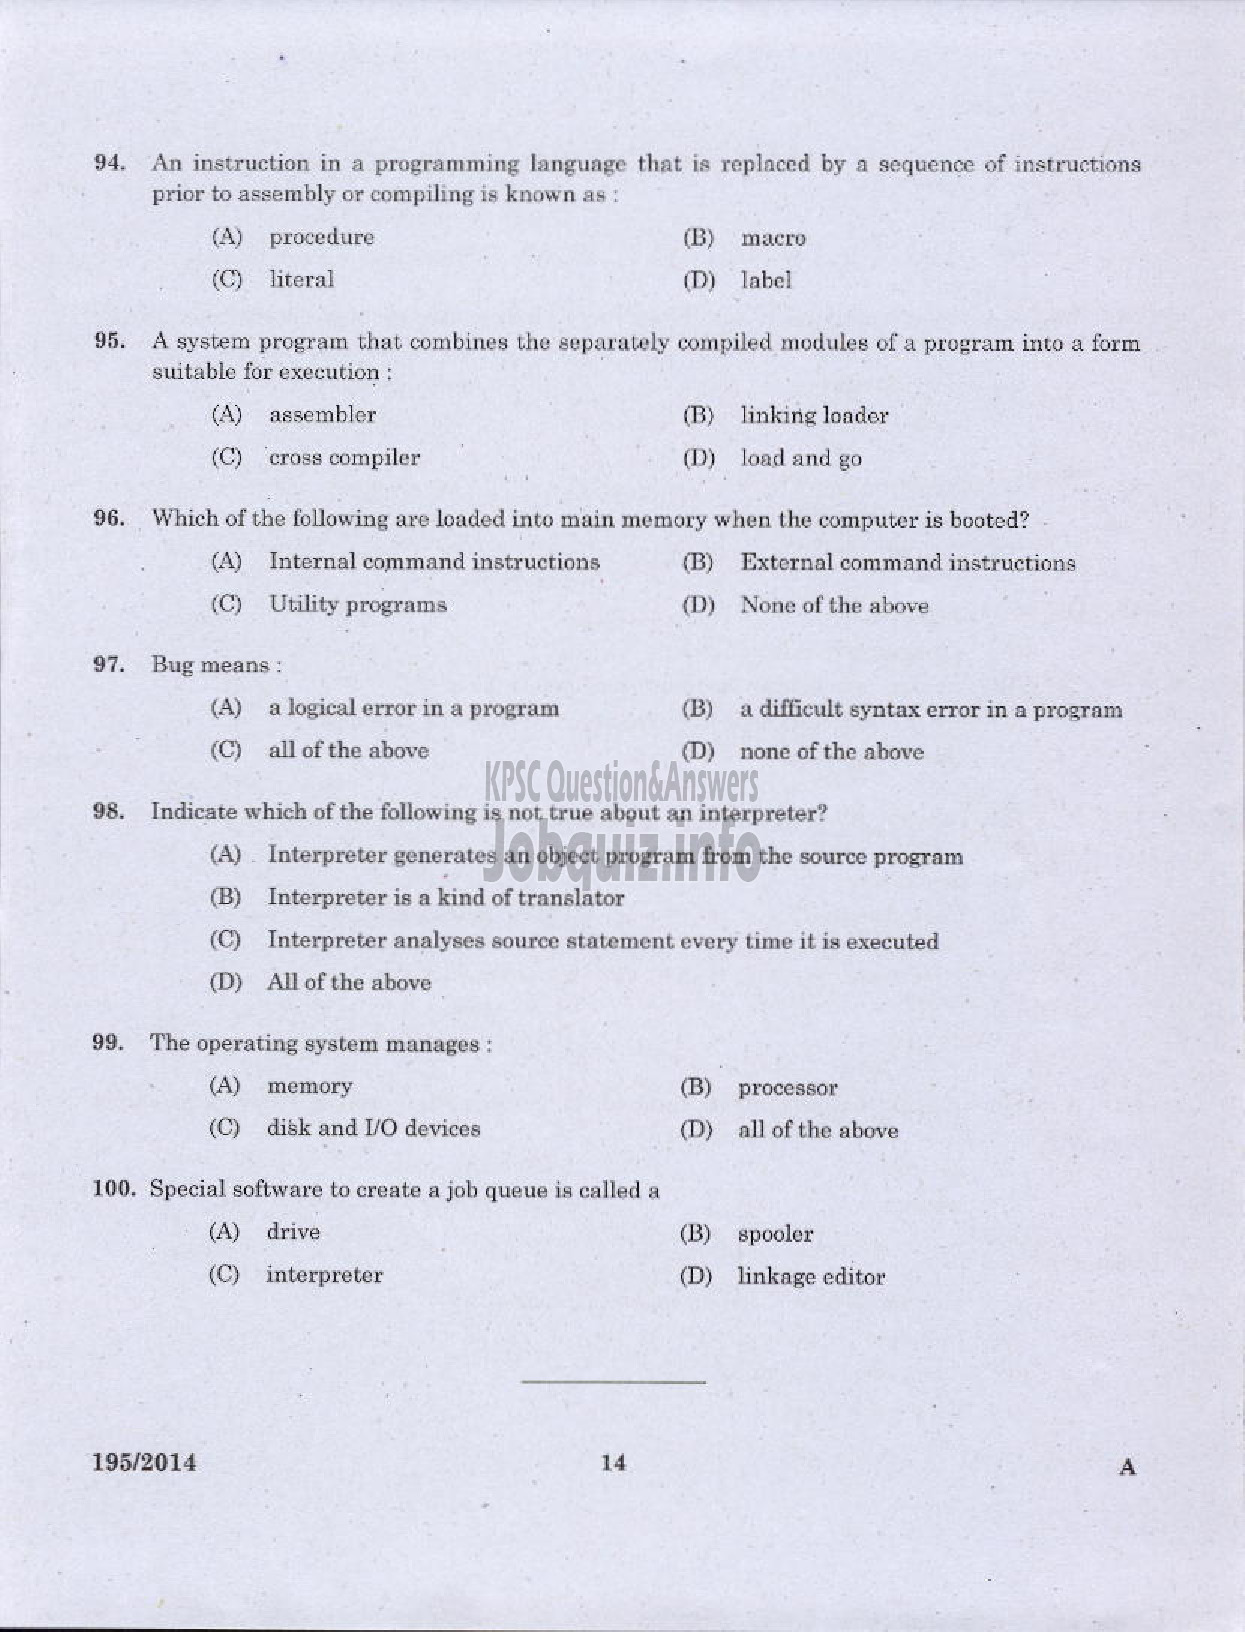 Kerala PSC Question Paper - COMPUTER PROGRAMMER CUM OPERATOR KERALA STATE BEVERAGES / MANUFACTURING AND MARKETING CORPORATION LTD-12